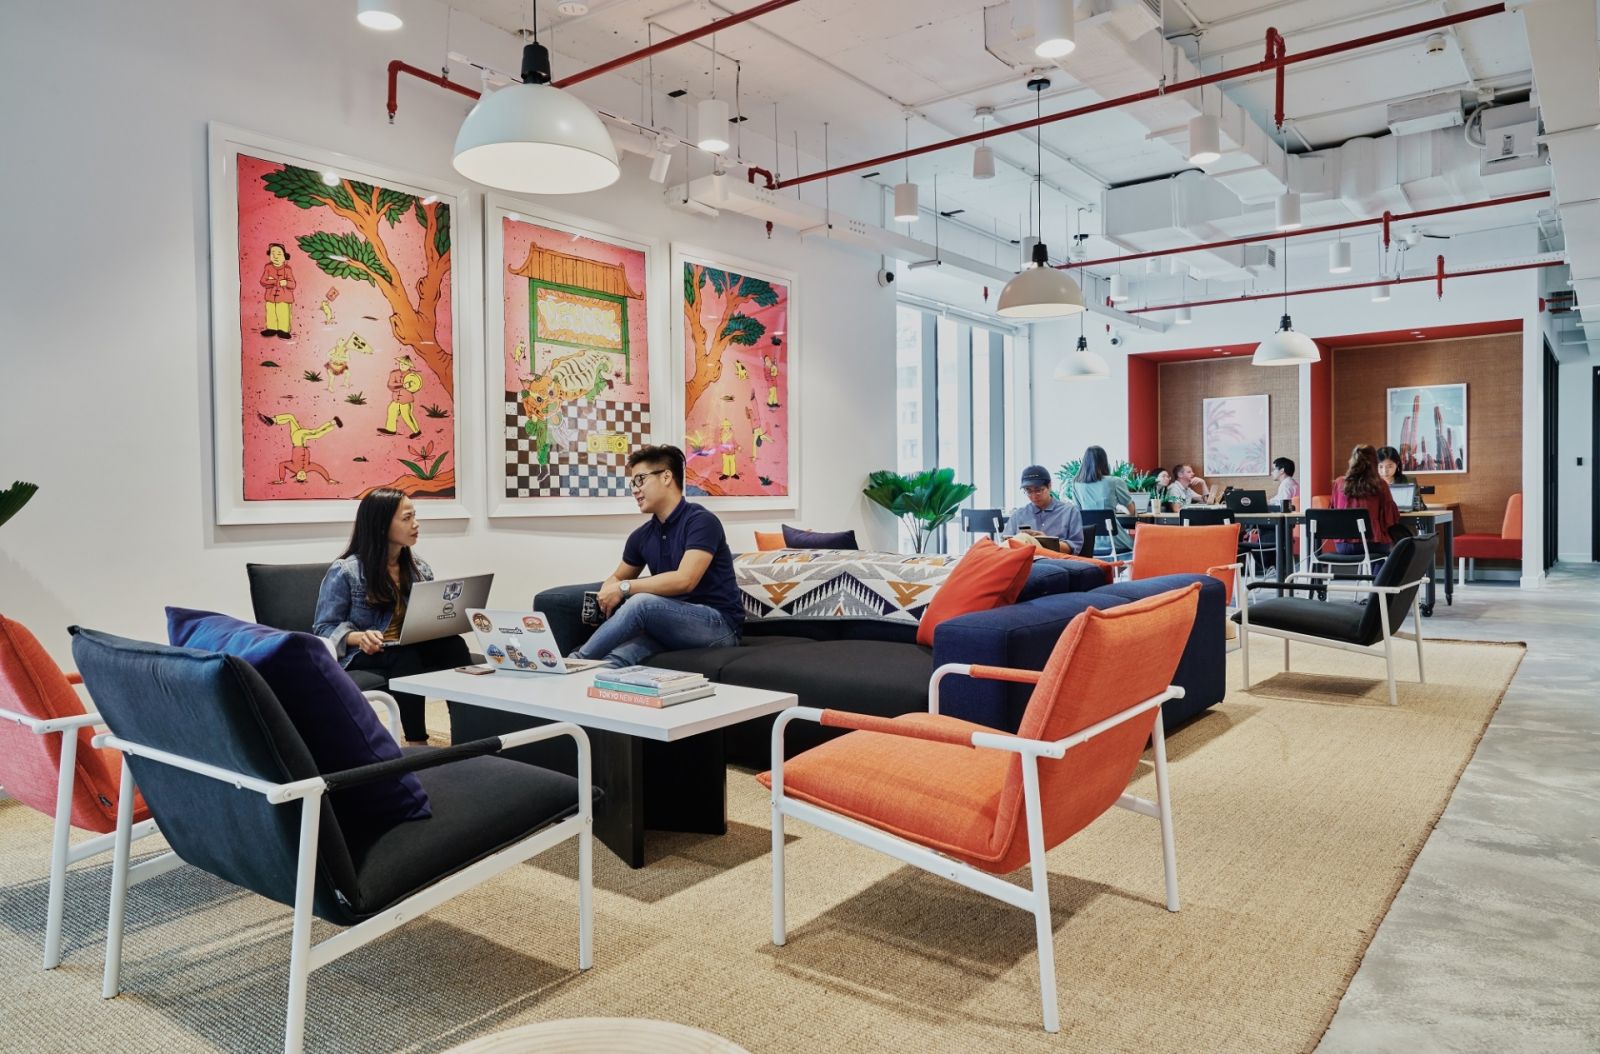 Leading the world in thinking about the interaction of space, people, and technology, WeWork is transforming the future of work.